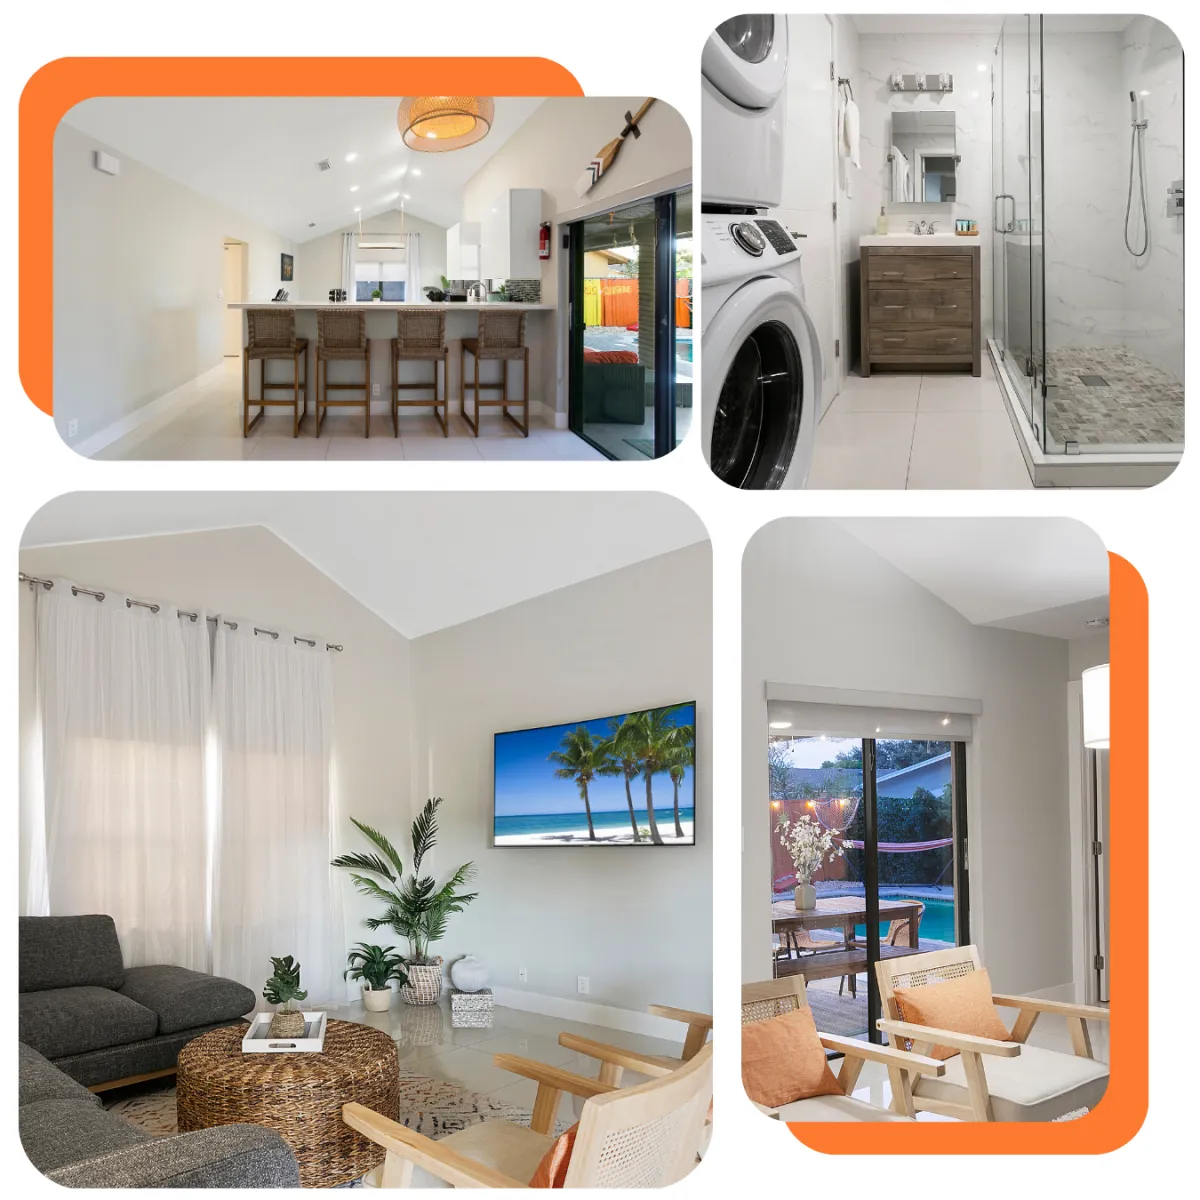 Discover Citrus Villa Stay – your stylish retreat with four bedrooms, a modern kitchen, and a heated outdoor pool. Located in a serene neighborhood near beaches, shops, and restaurants